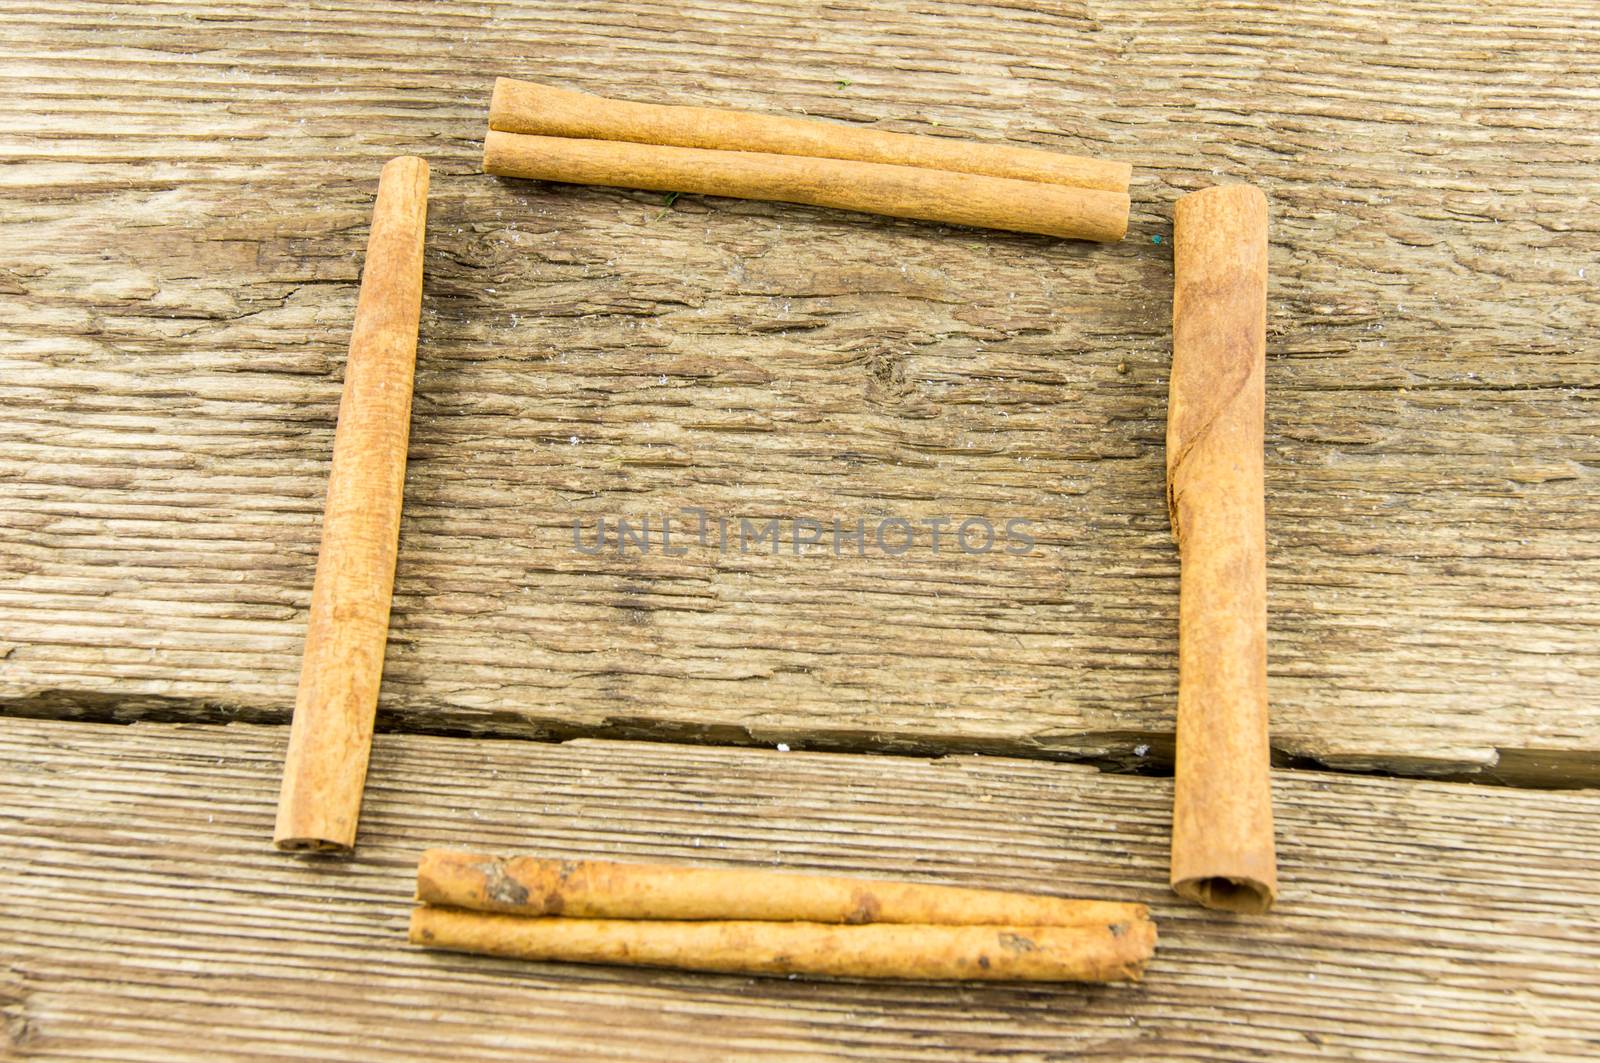 Close up of cinnamon sticks on rustic wood . For your commercial and editorial use.